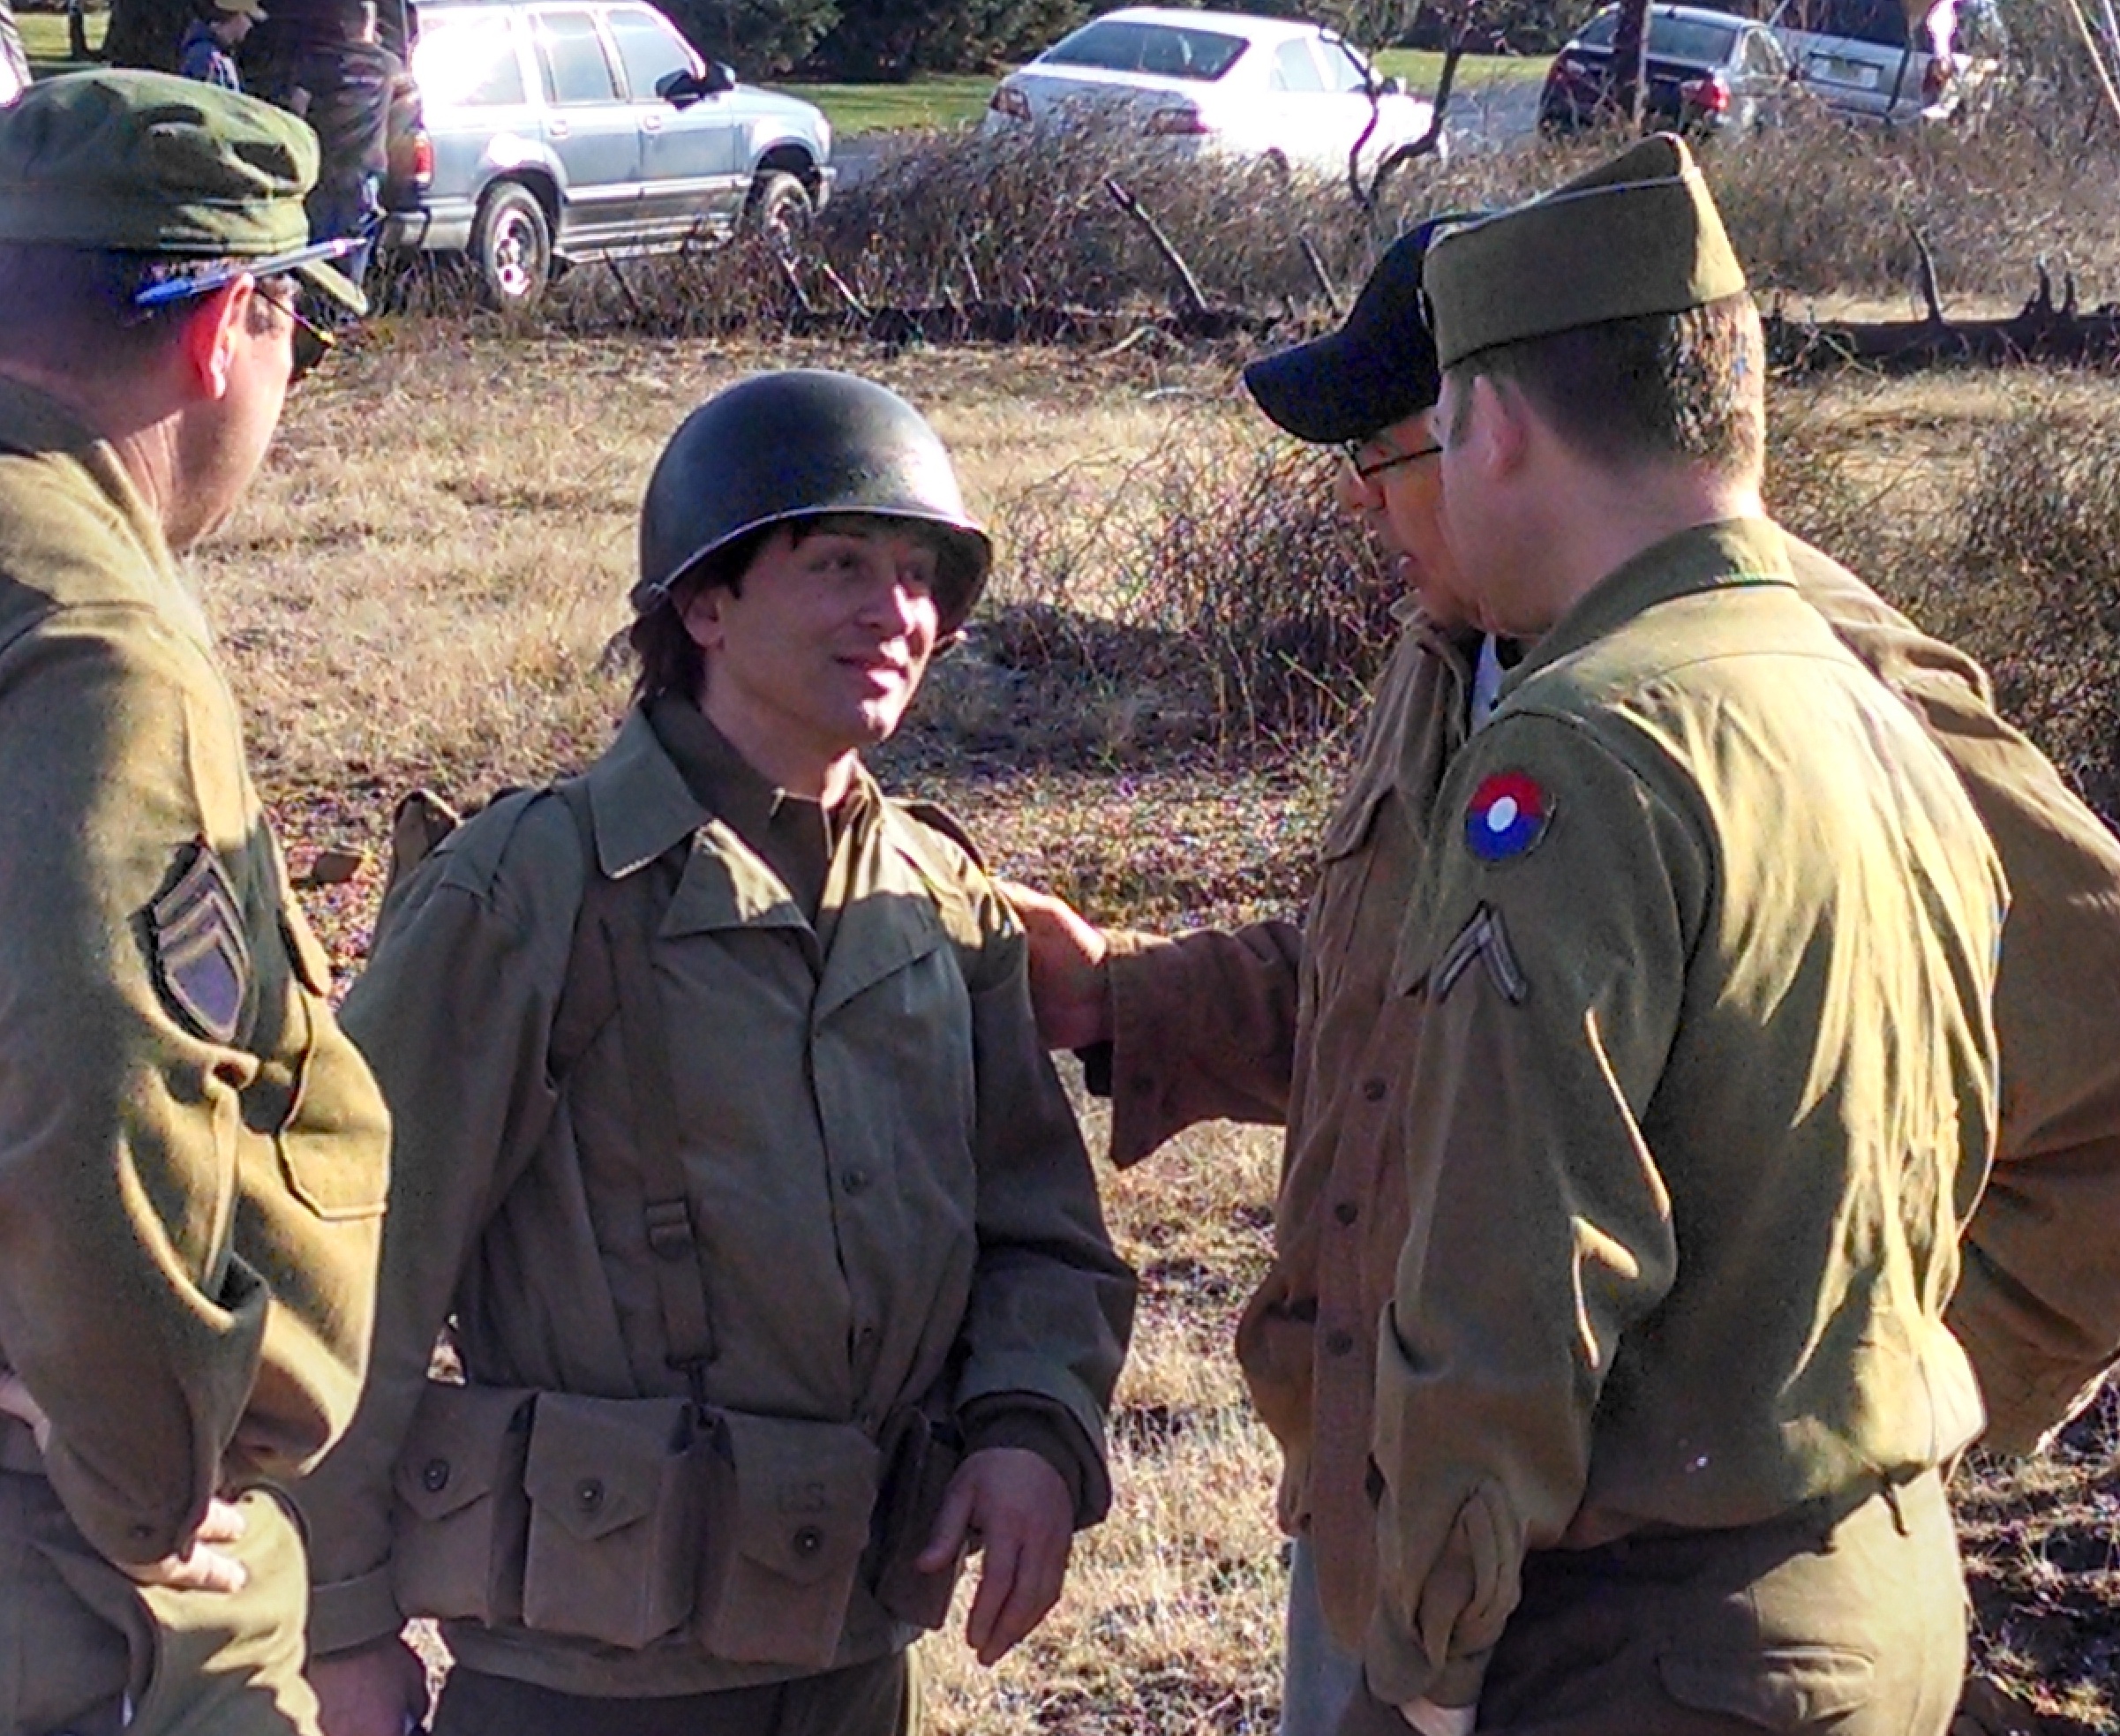 Director Michael Fraticelli introduces actor Johnny Alonso to one of the extras on set. Johnny plays Italian soldier Corporal Fiato in 